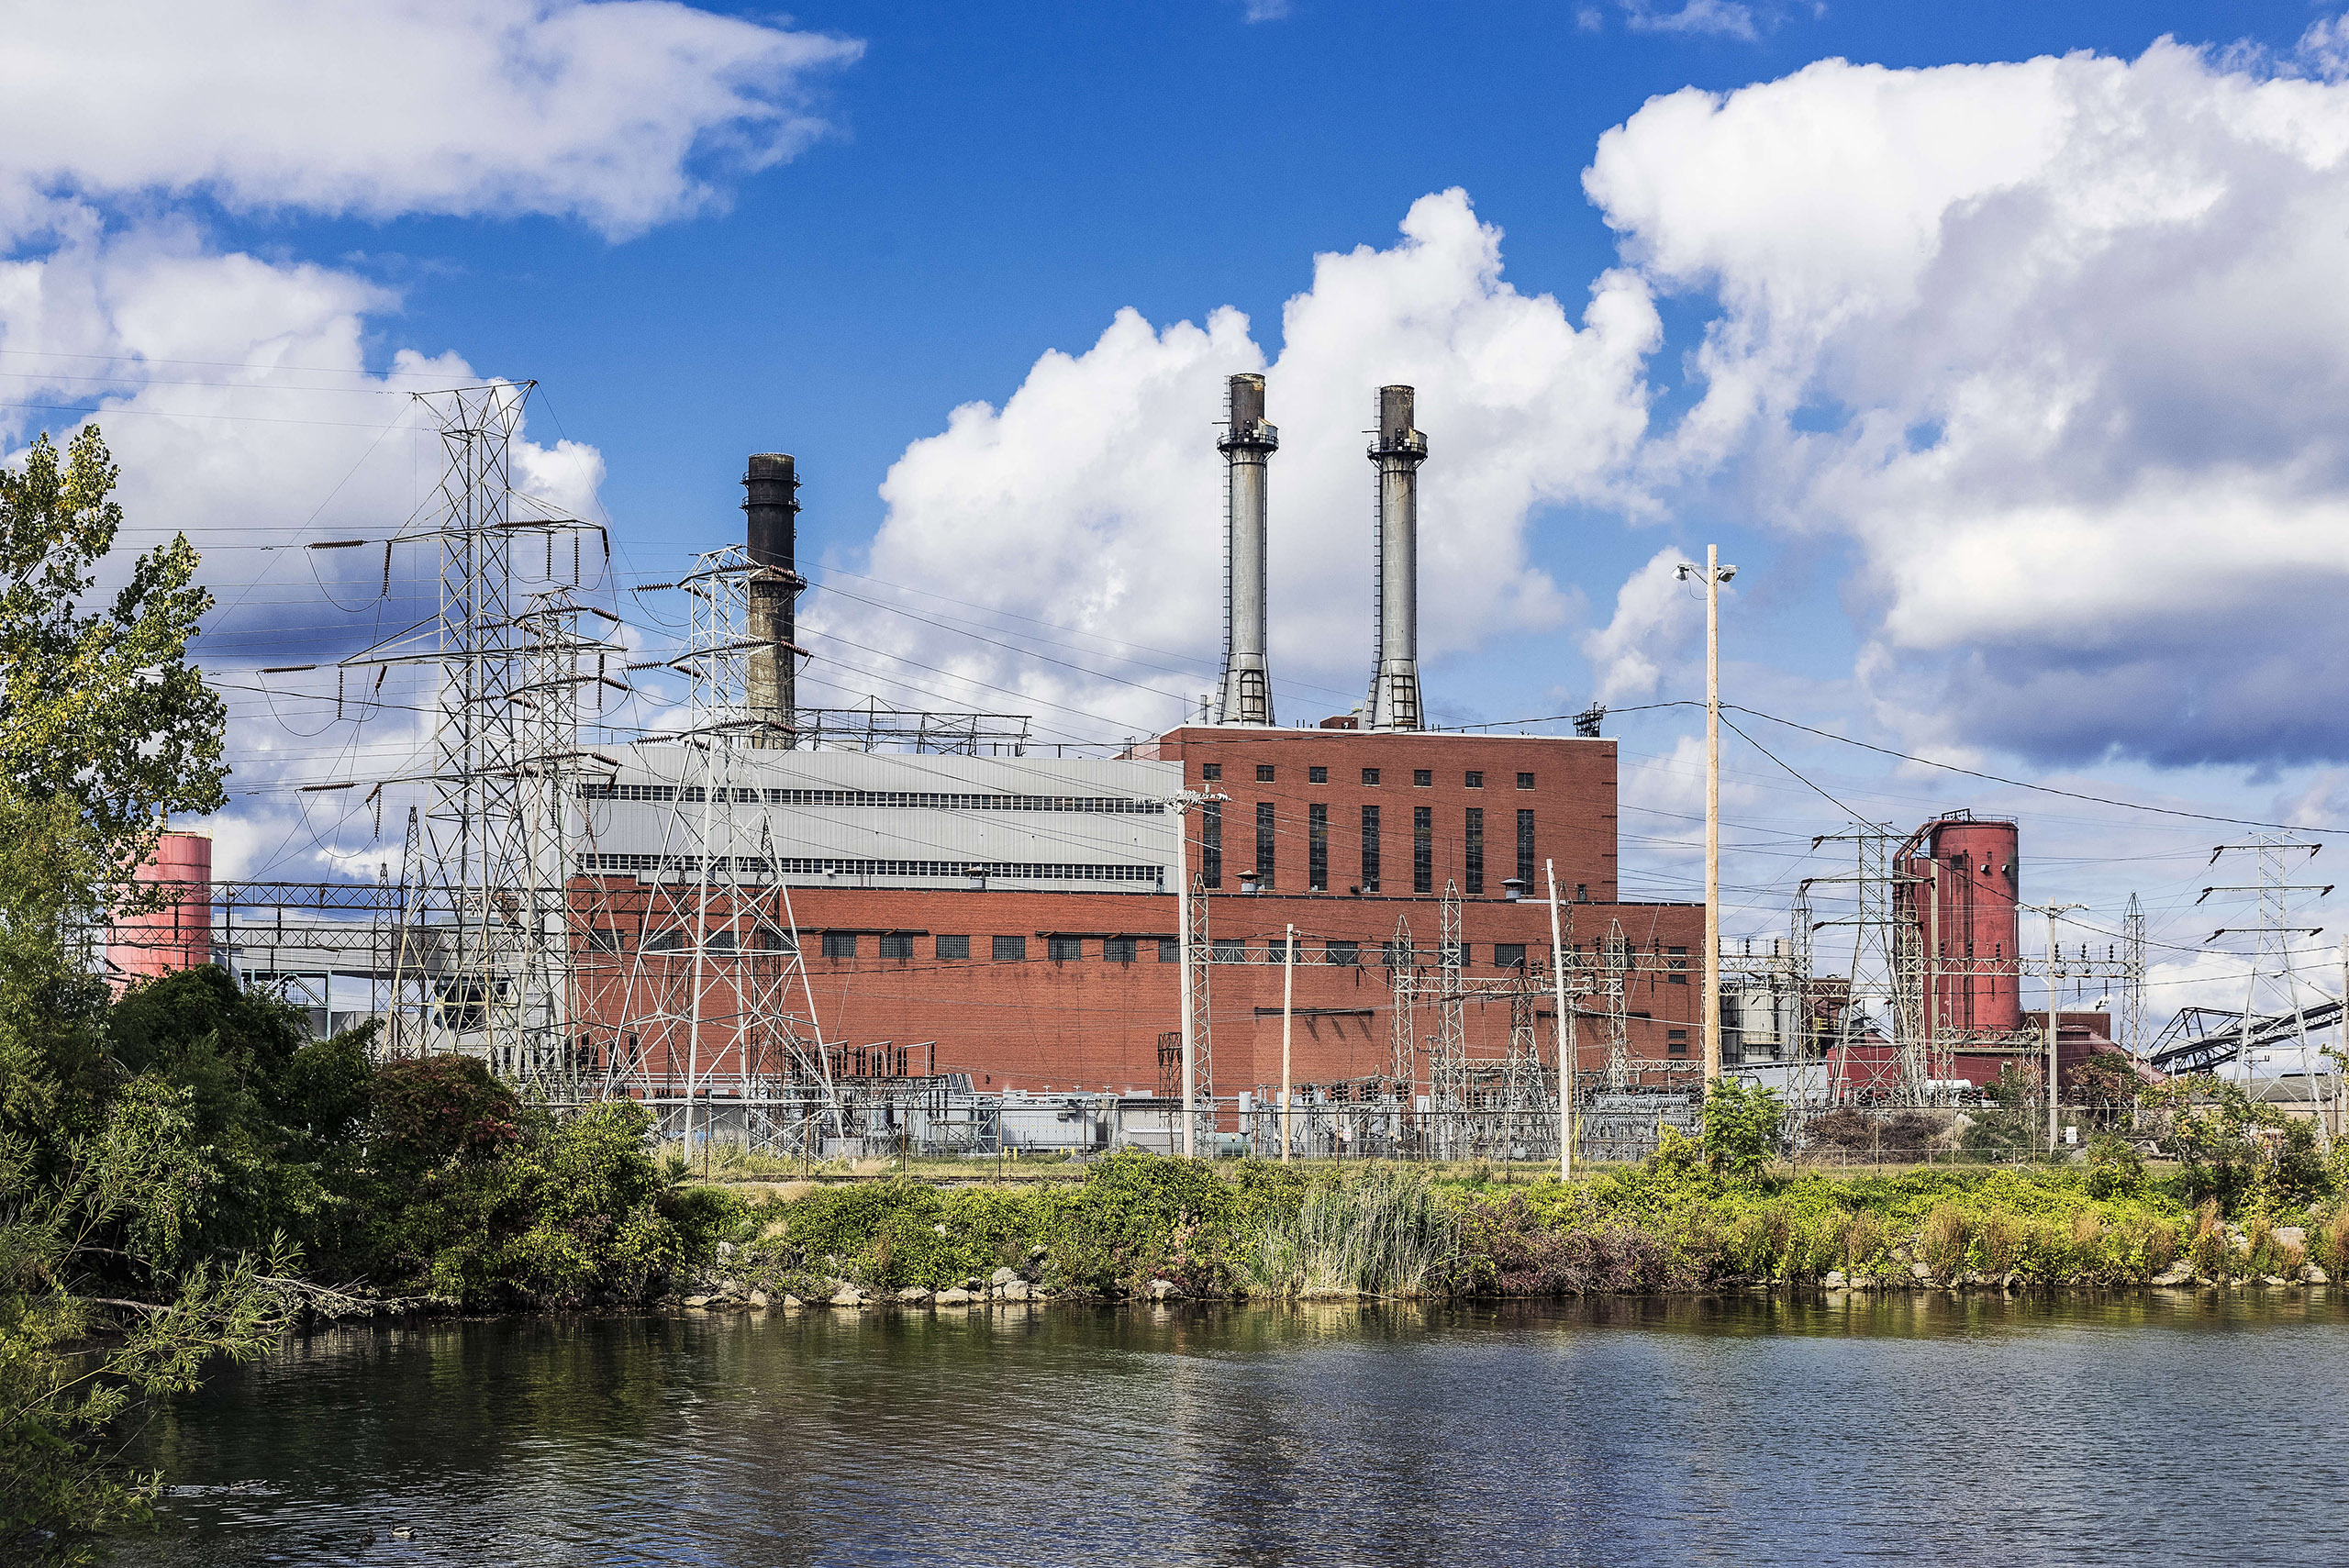 A NRG owned coal fired energy facility that plans to convert to a natural gas facility in Dunkirk, NY. (John Greim—LightRocket/Getty Images)